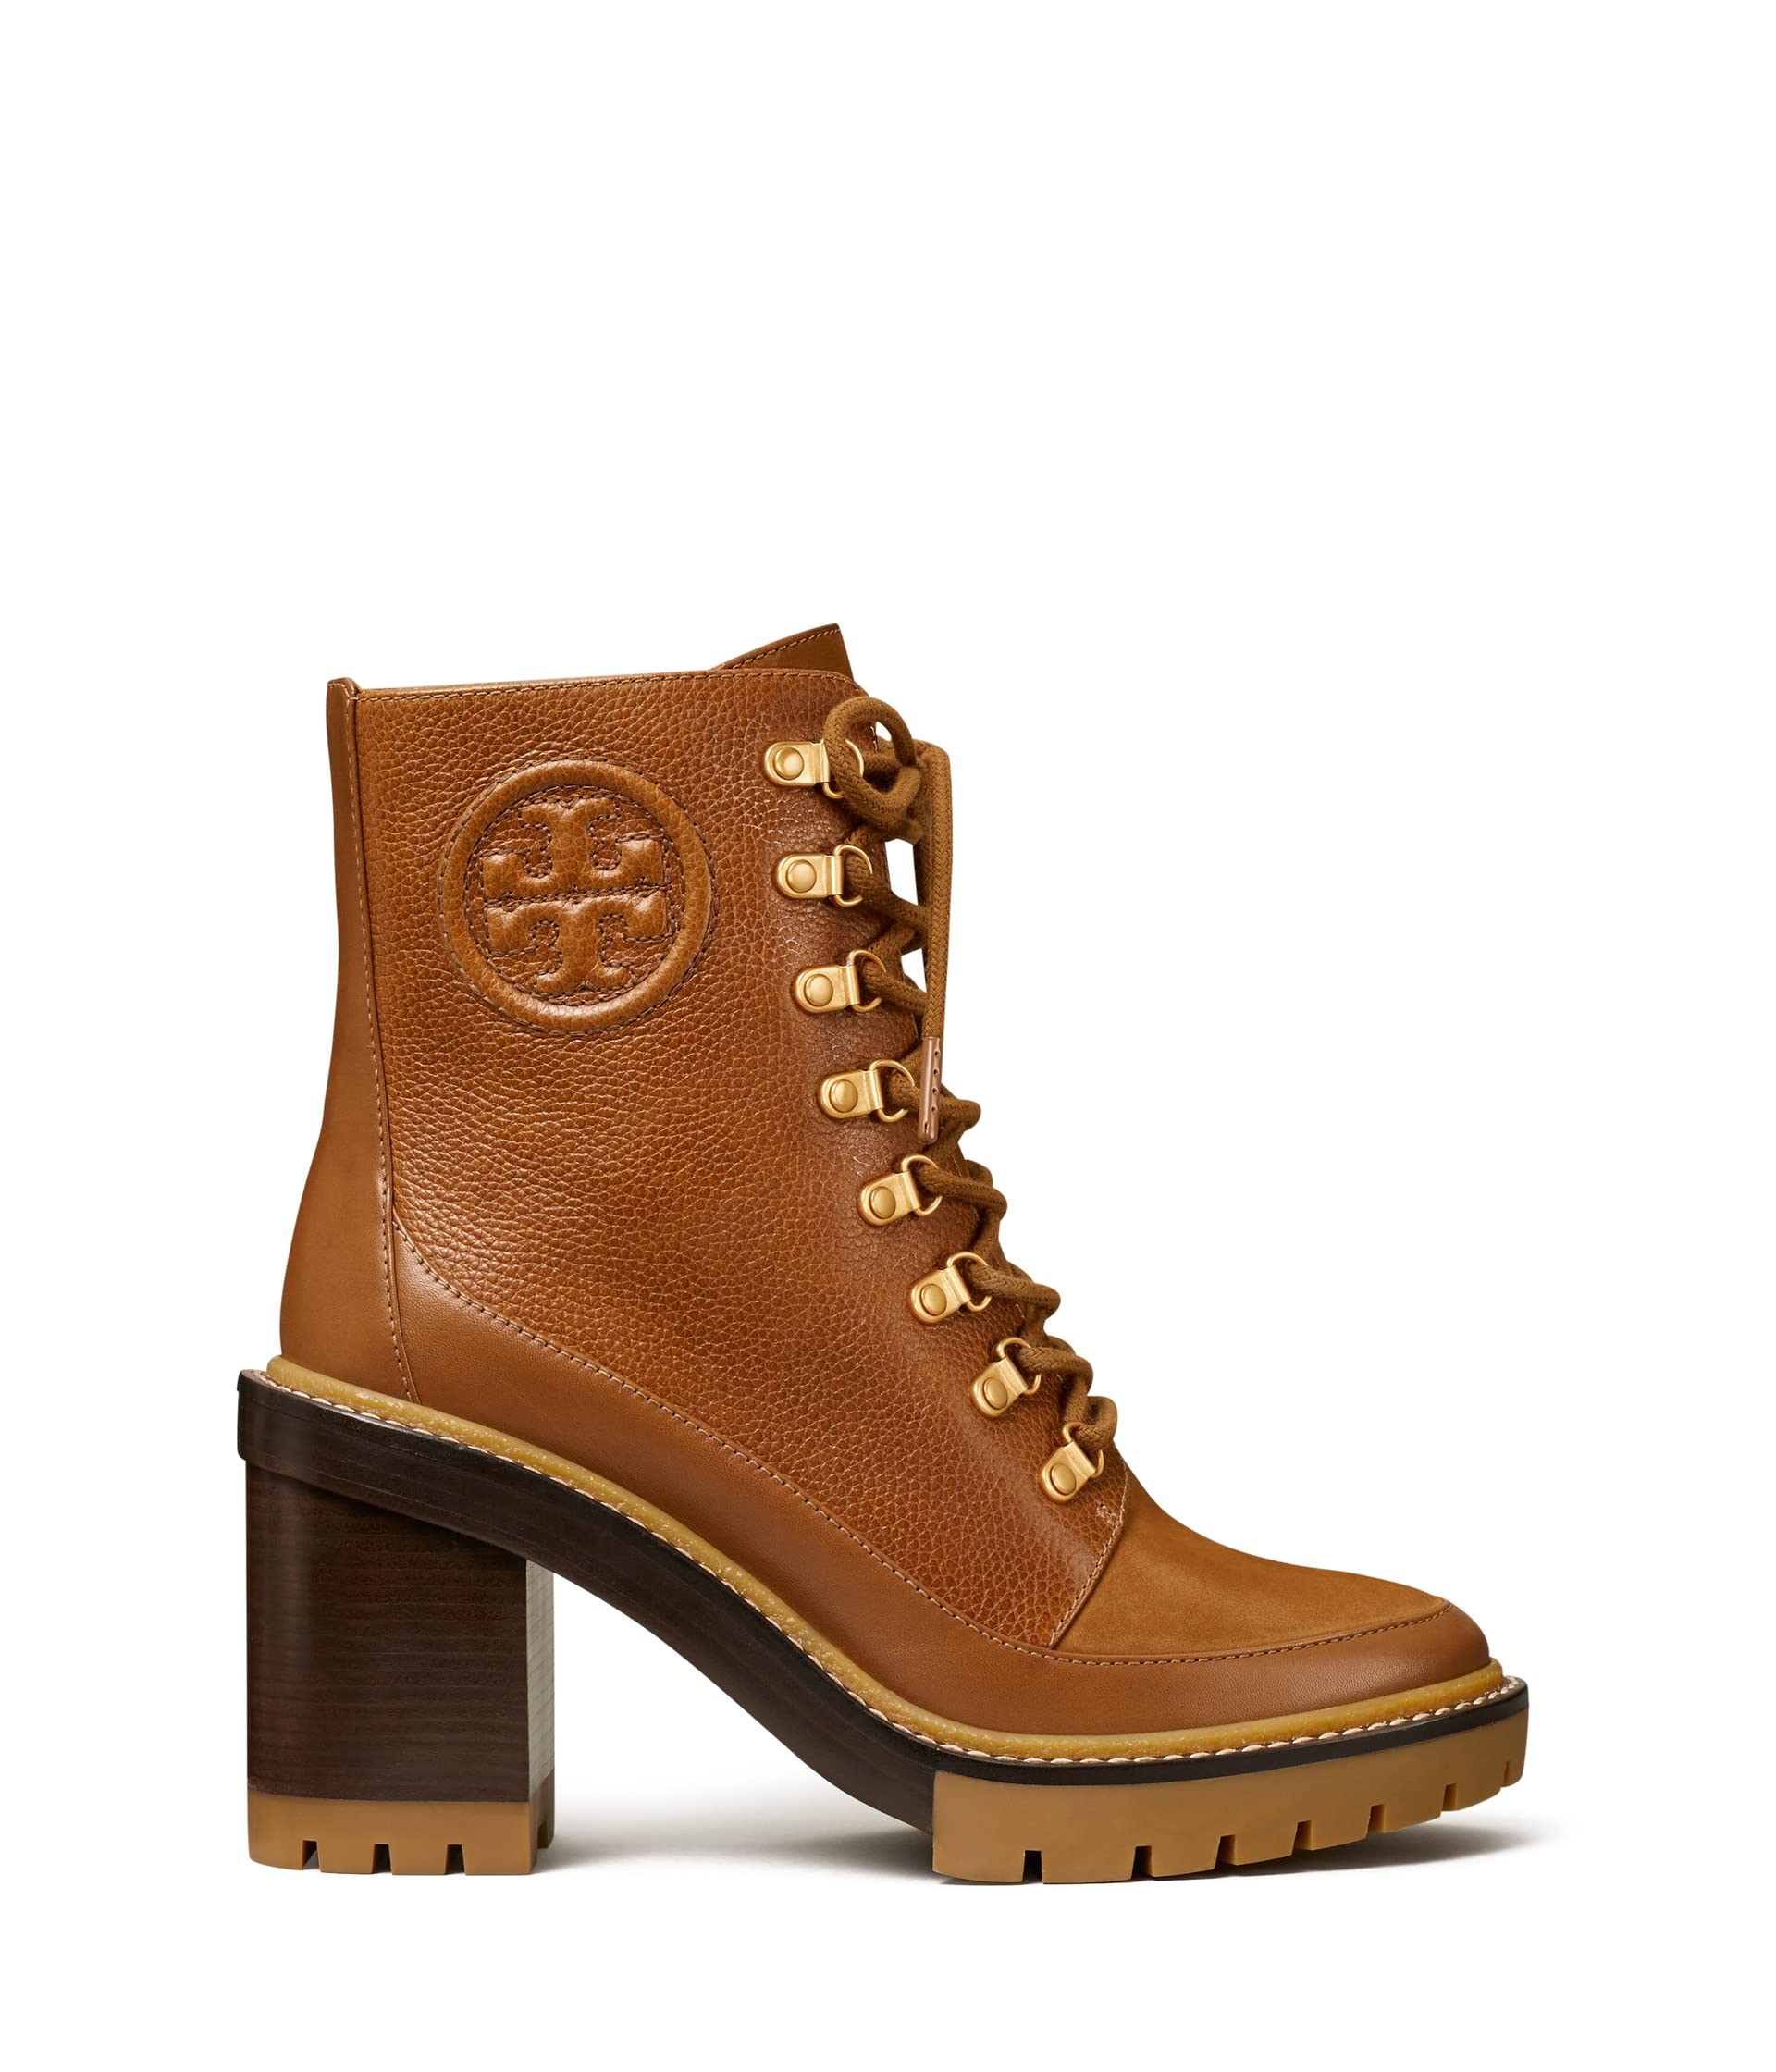 69% Off 95 mm Miller Lug Sole Bootie Tory Burch Best-Selling - A Don't-Wait  Offer